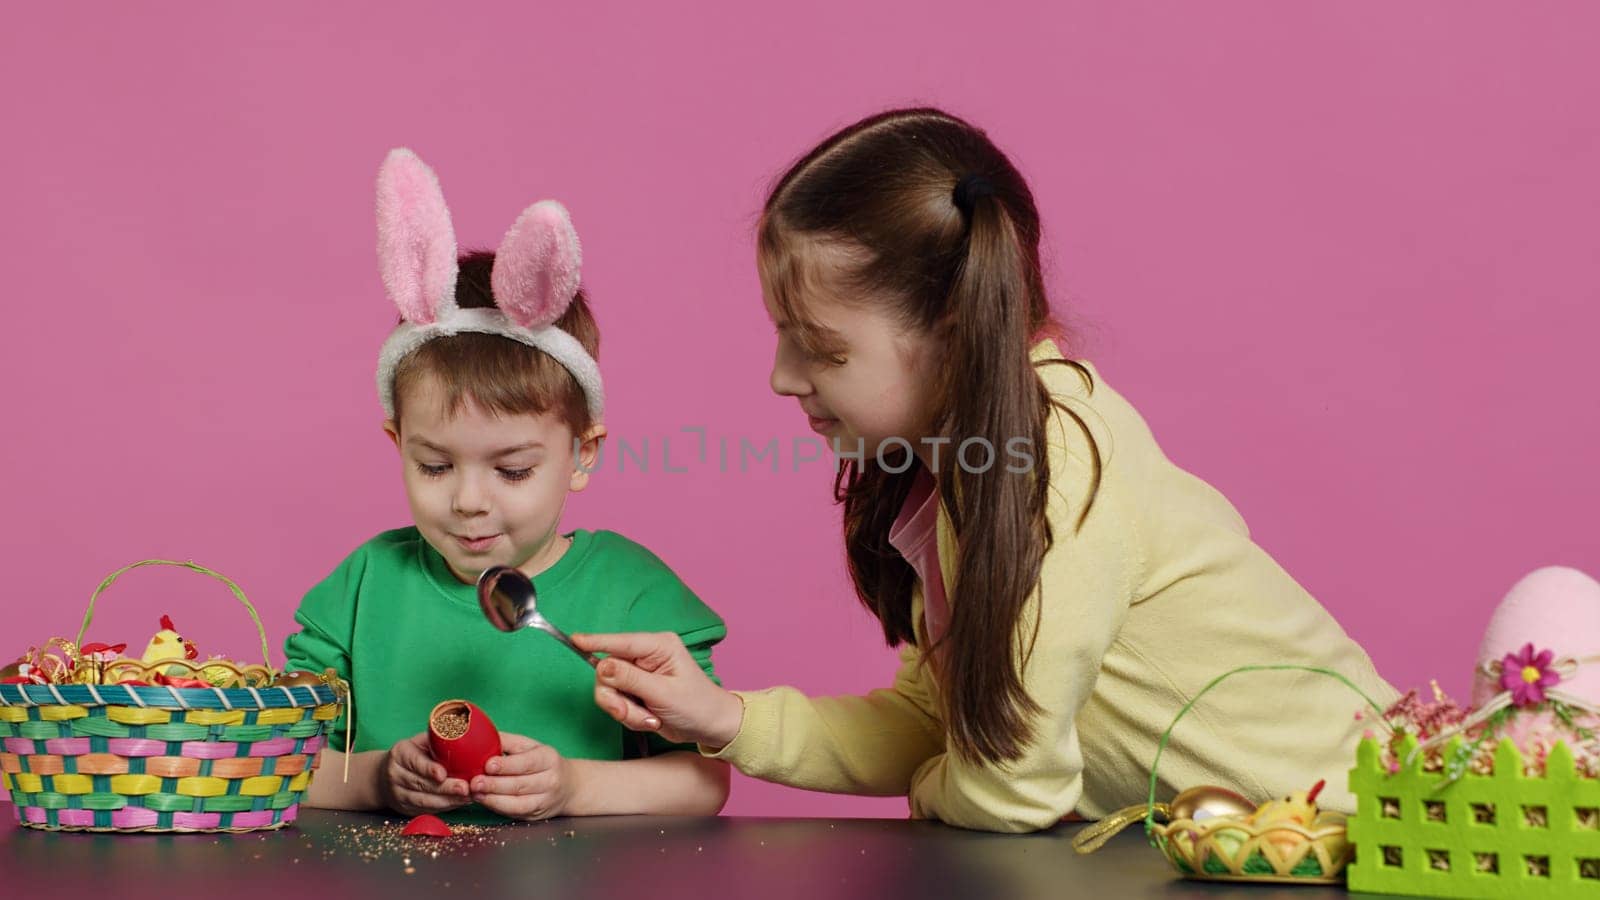 Ecstatic kids breaking a special easter egg to find a surprise inside, feeling curious about a festive decoration that transforms in a plant. Cheerful little children having fun in studio. Camera A.